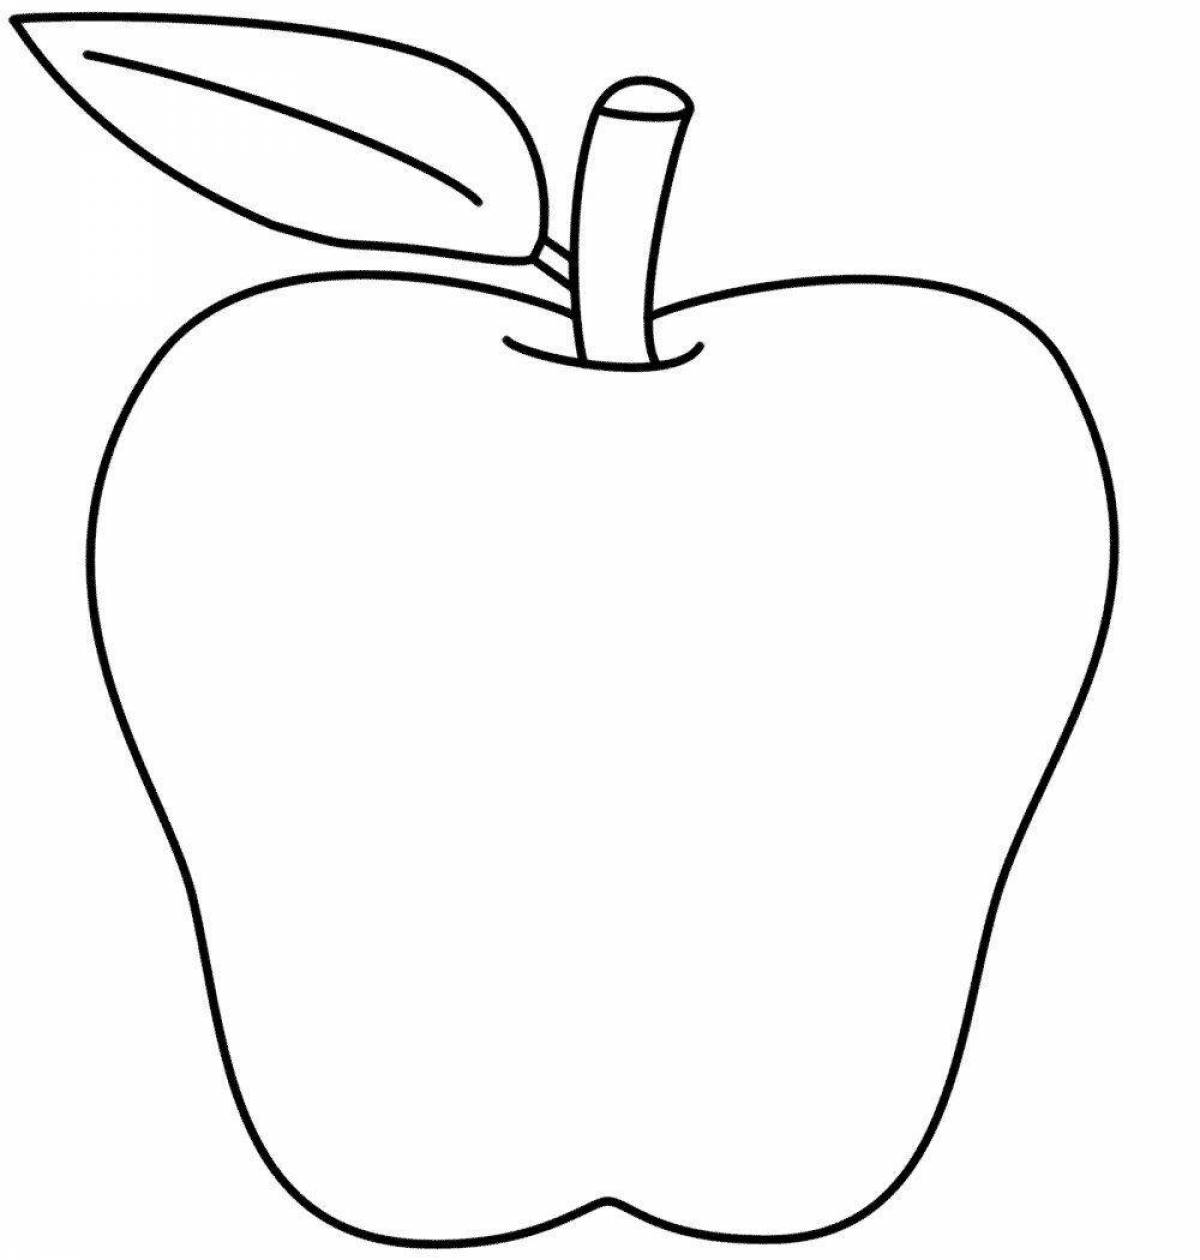 Playful drawing of an apple for kids